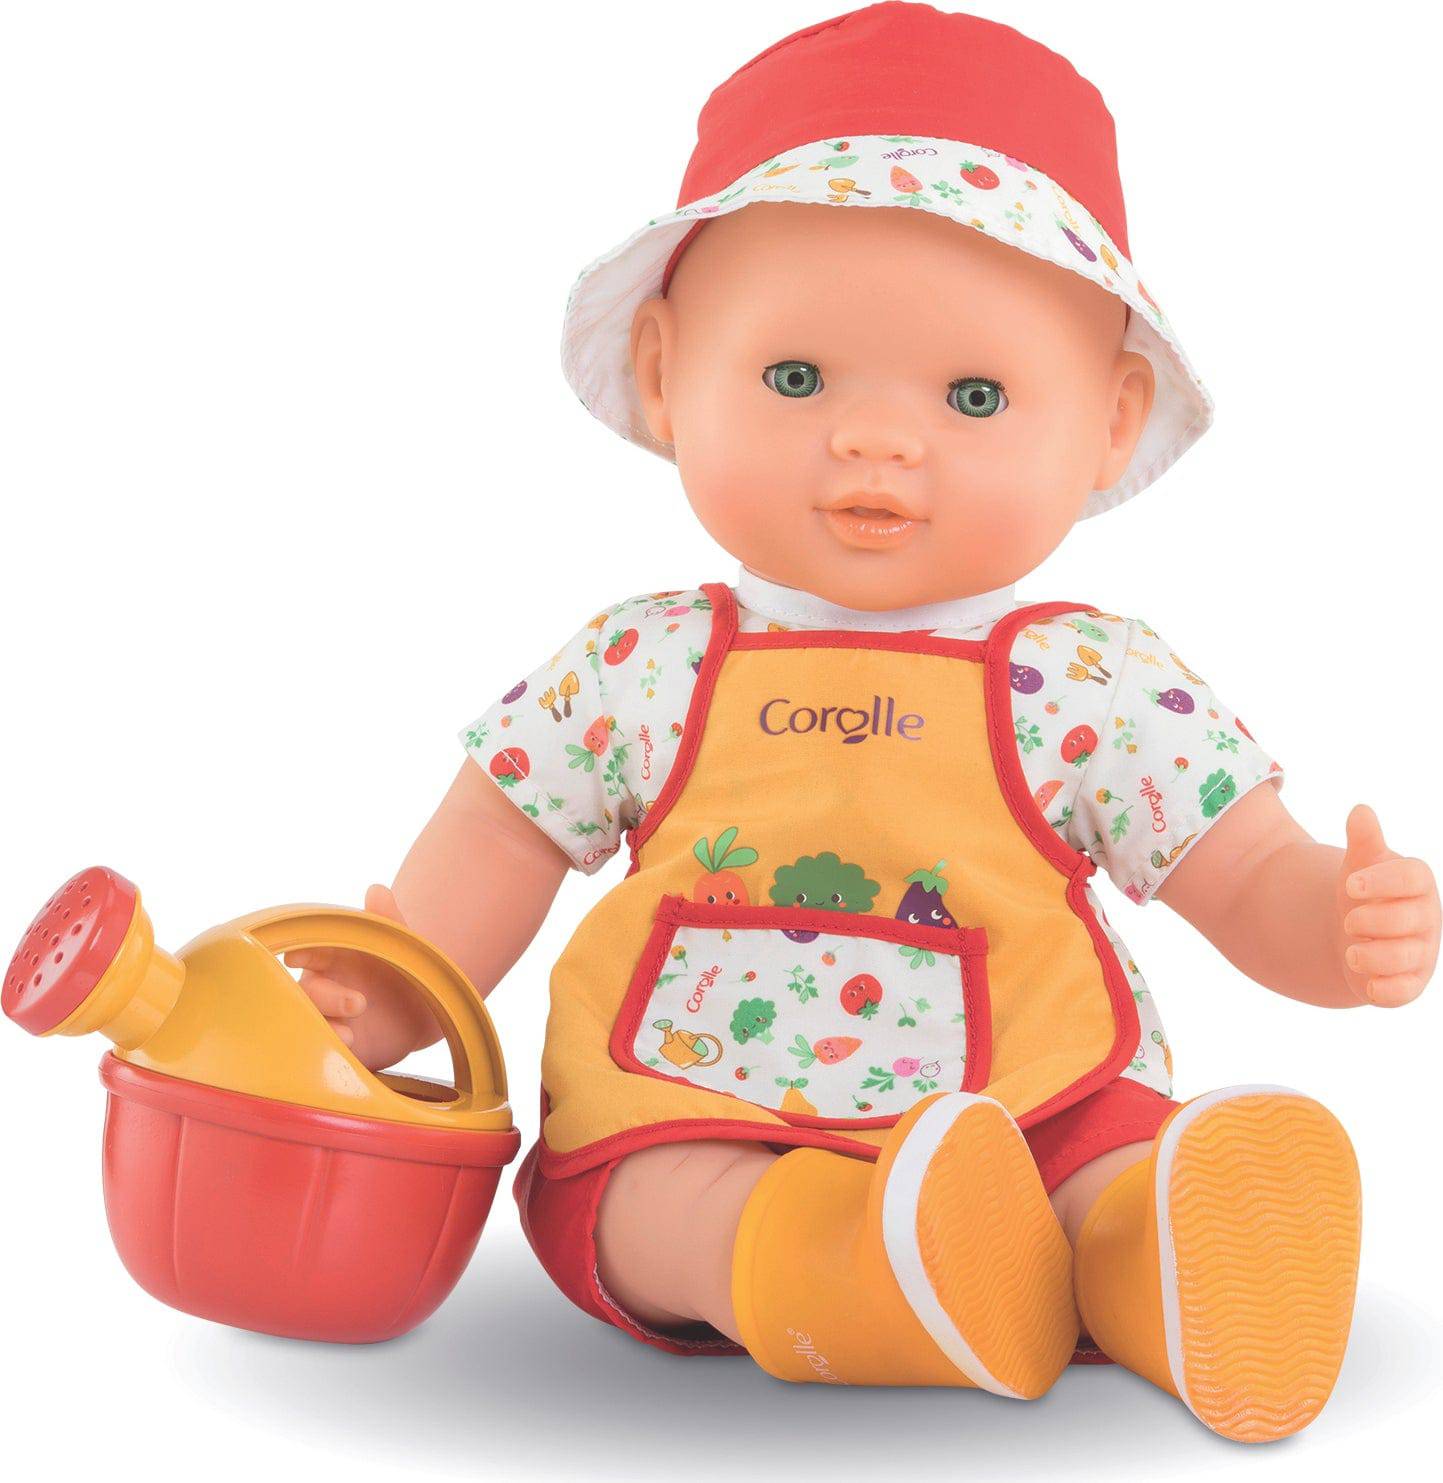 Charly Gardening Doll - A Child's Delight